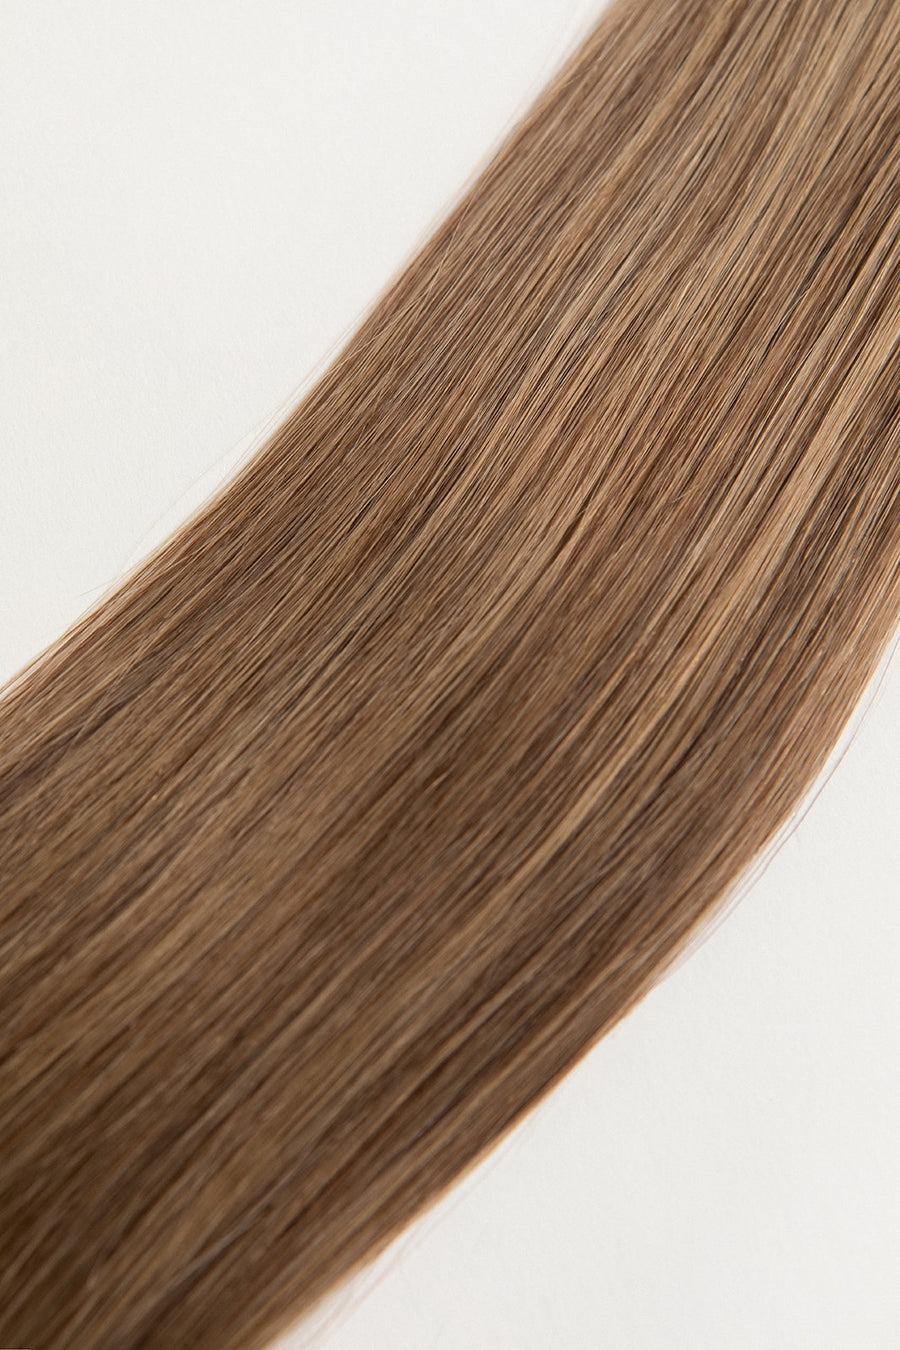 Spiced Suede is our flawless balayage brunette blend. Stylist lingo: Natural rooted level 6 blended into natural/gold dimensional levels 6 & 9The Harloc Ponytail Extension is our clip-in ponytail that is made from ethically sourced, Remy Slavic hair. It is a quick way to instantly add length and volume to your ponytail and it comes in two lengths, 18-20” and 20-24”. It comes with a velcro base and clip to secure the ponytail. Available in 10 of our beautiful shades.